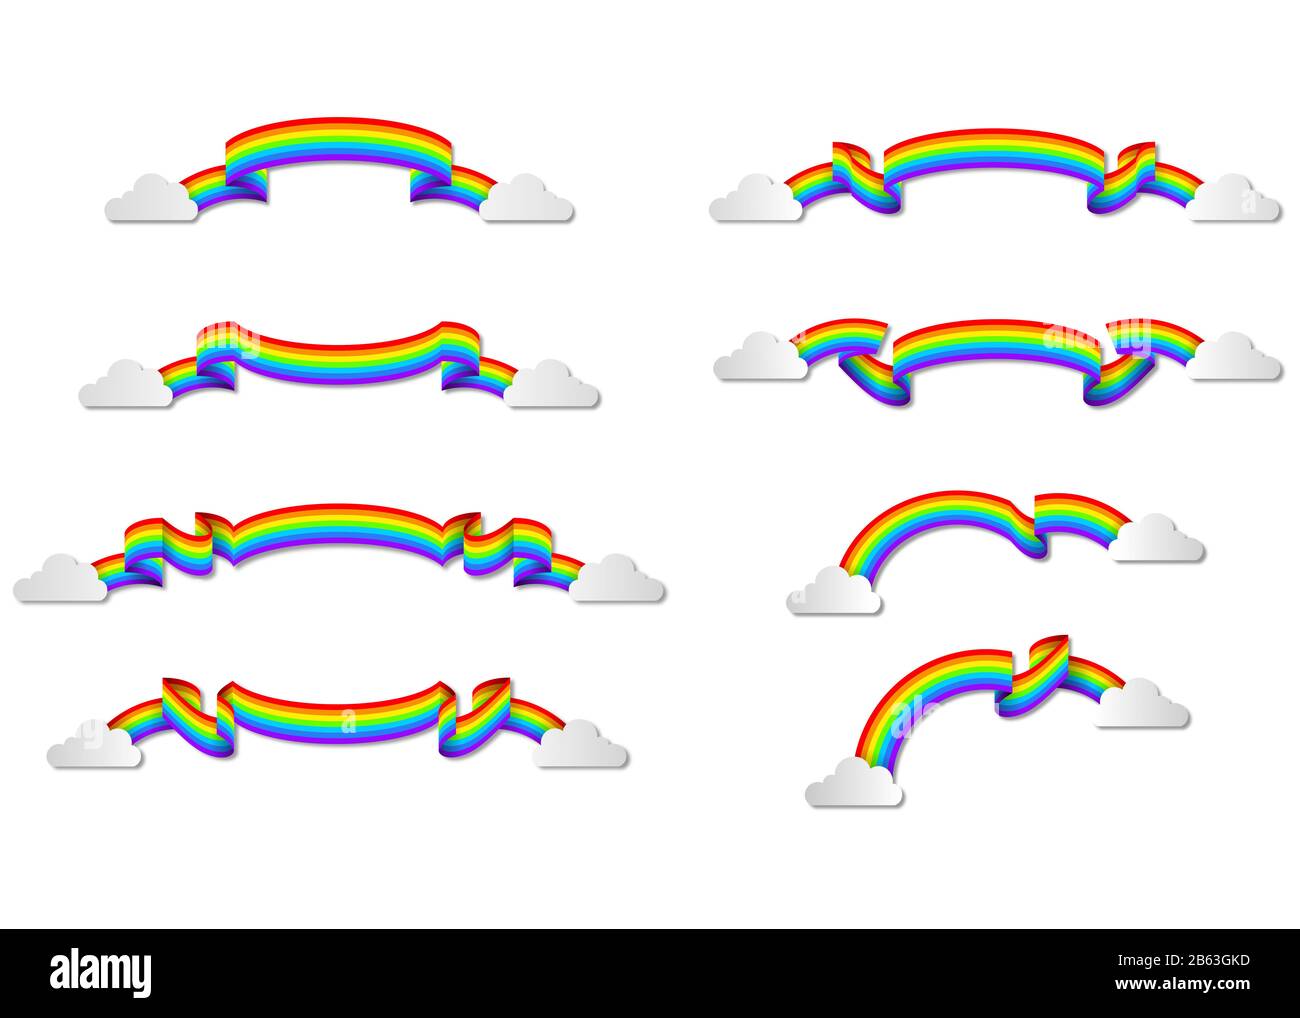 Set of ribbons with rainbow colors and clouds.  Rainbow banners or labels collection Stock Photo